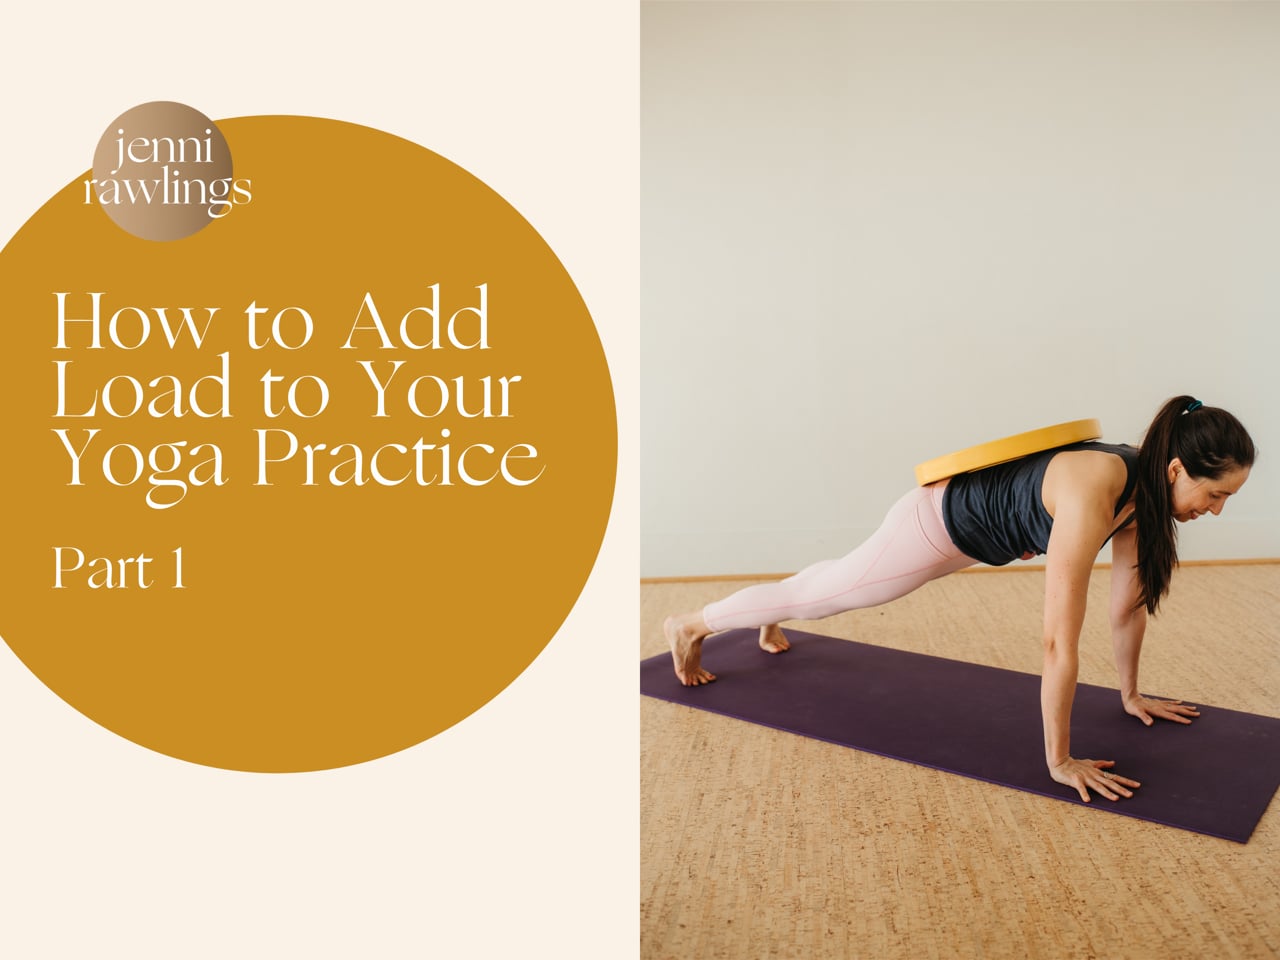 How to Add Load to Your Yoga Practice, Part 1